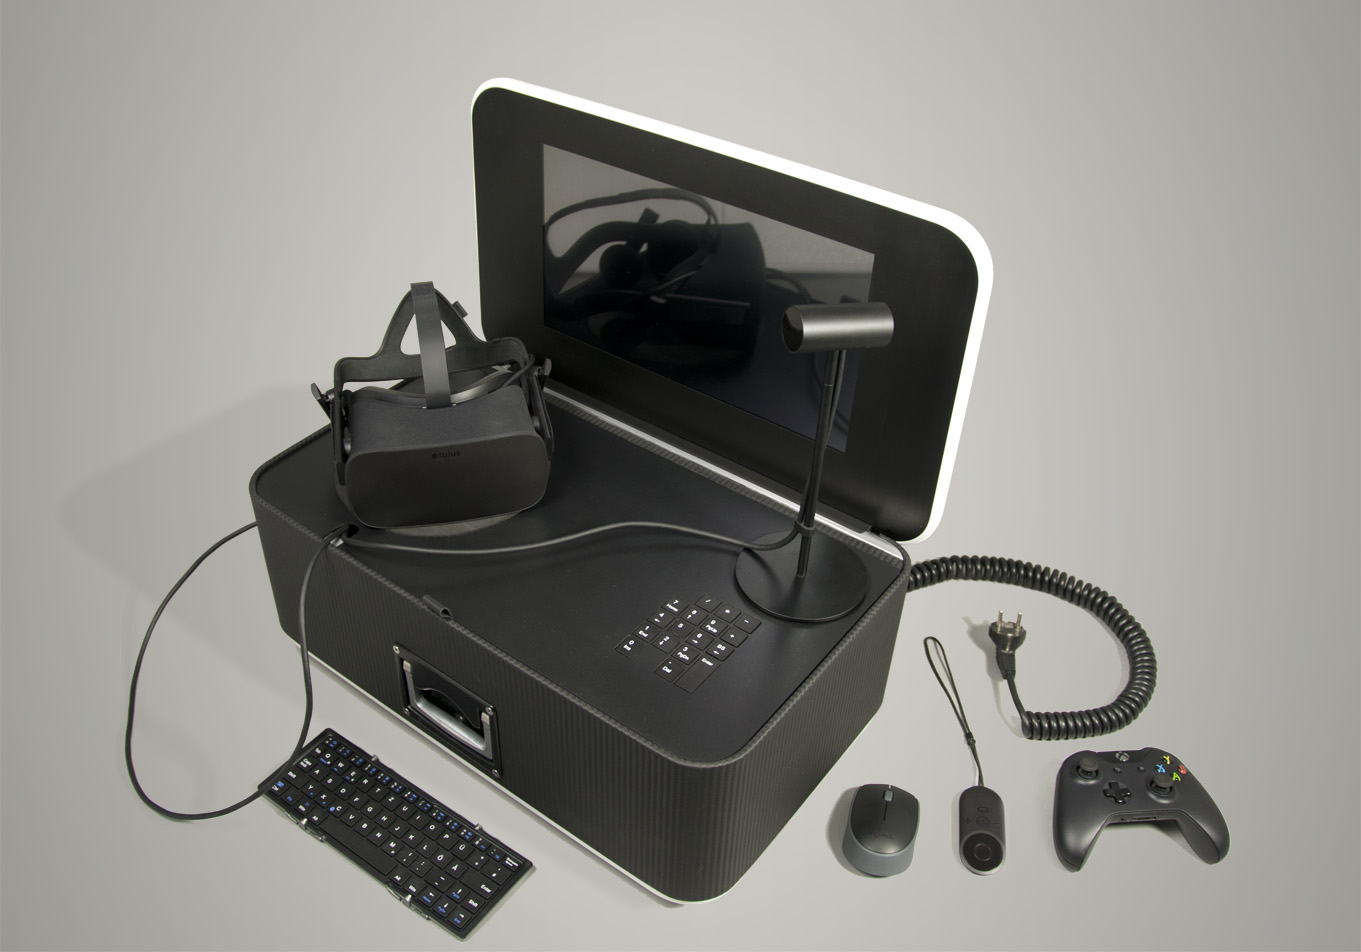 Portable VR-System for using the Oculus Rift on the go